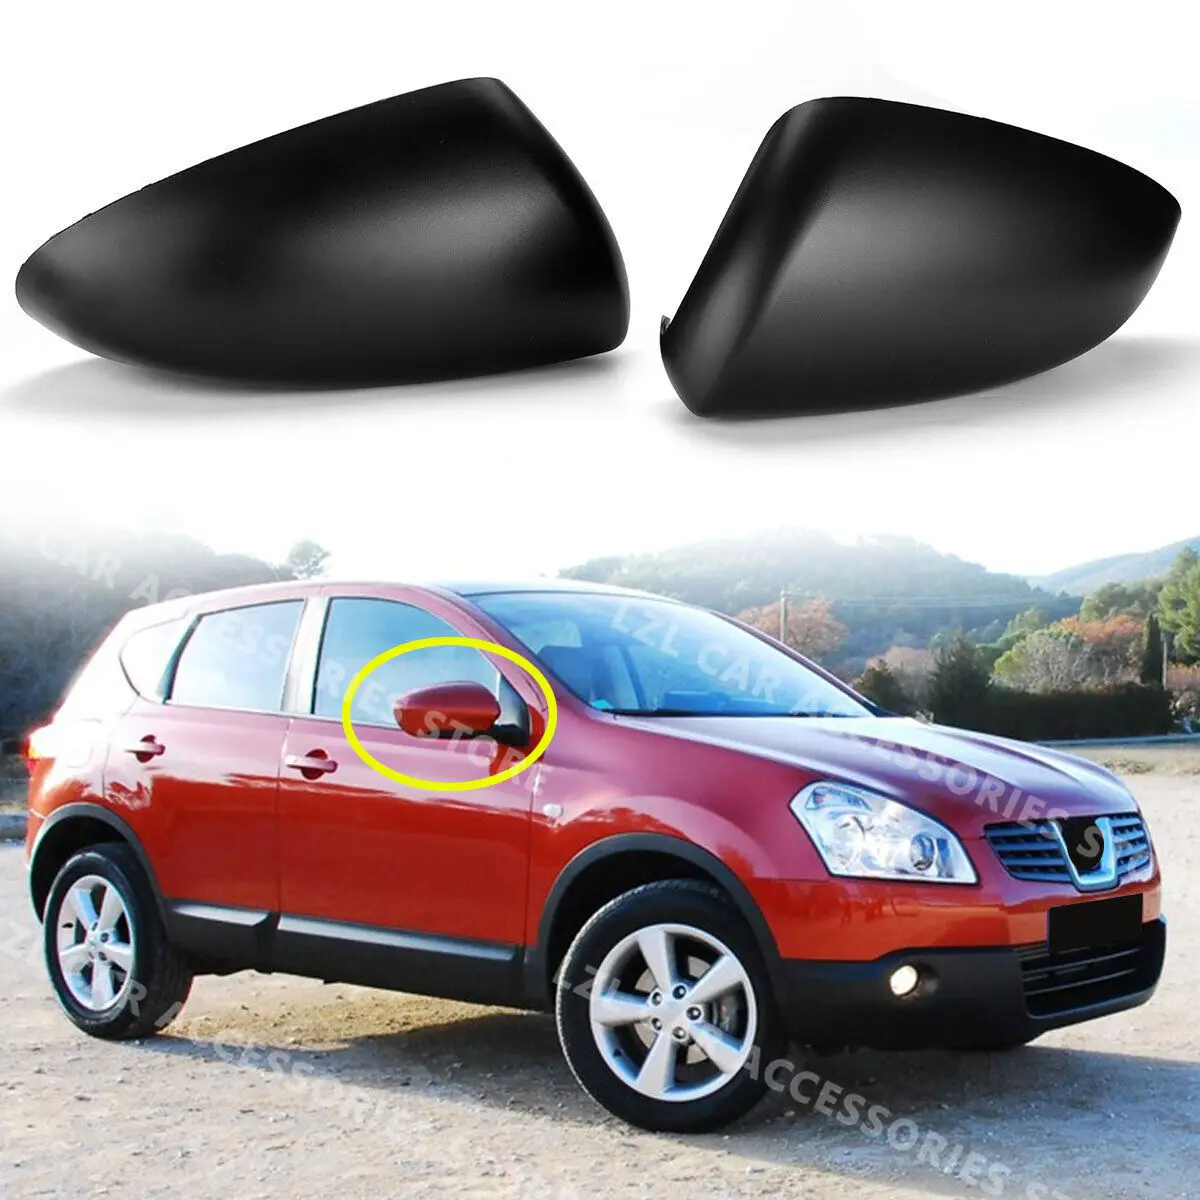 

2Pcs For Nissan Qashqai 2007-2014 J10 Side Door Rearview Mirror Cover Trims Car Accessories Left +Right Side Replacement Style